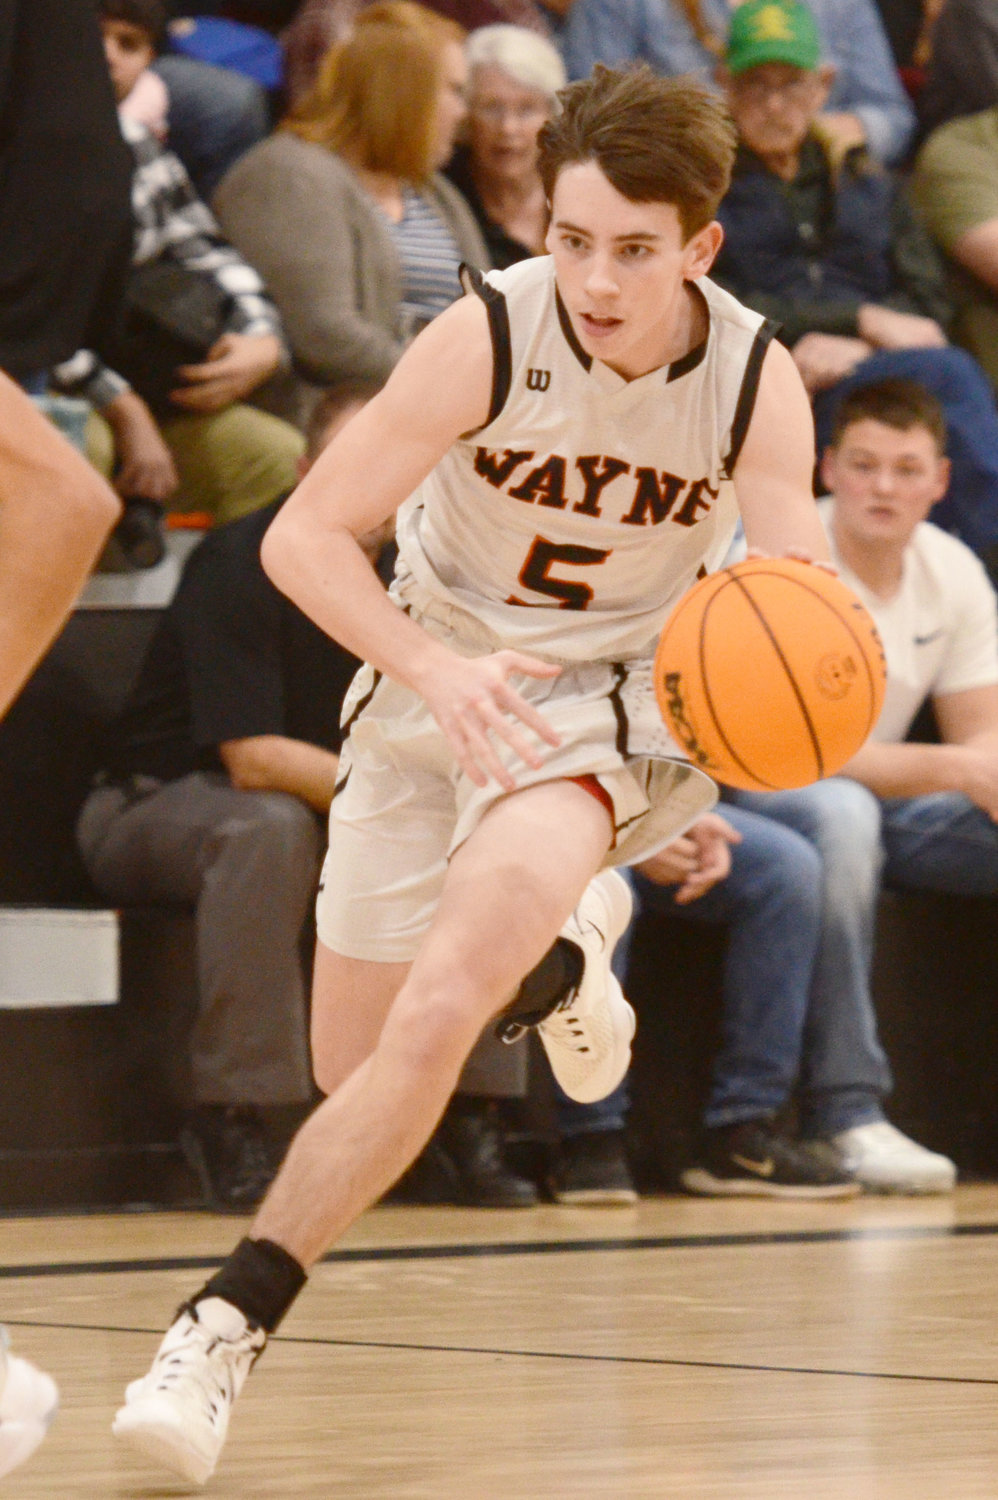 Wayne junior Kaleb Madden pushes the ball up the floor. The Bulldogs host Binger-Oney Friday night to open the District tournament.